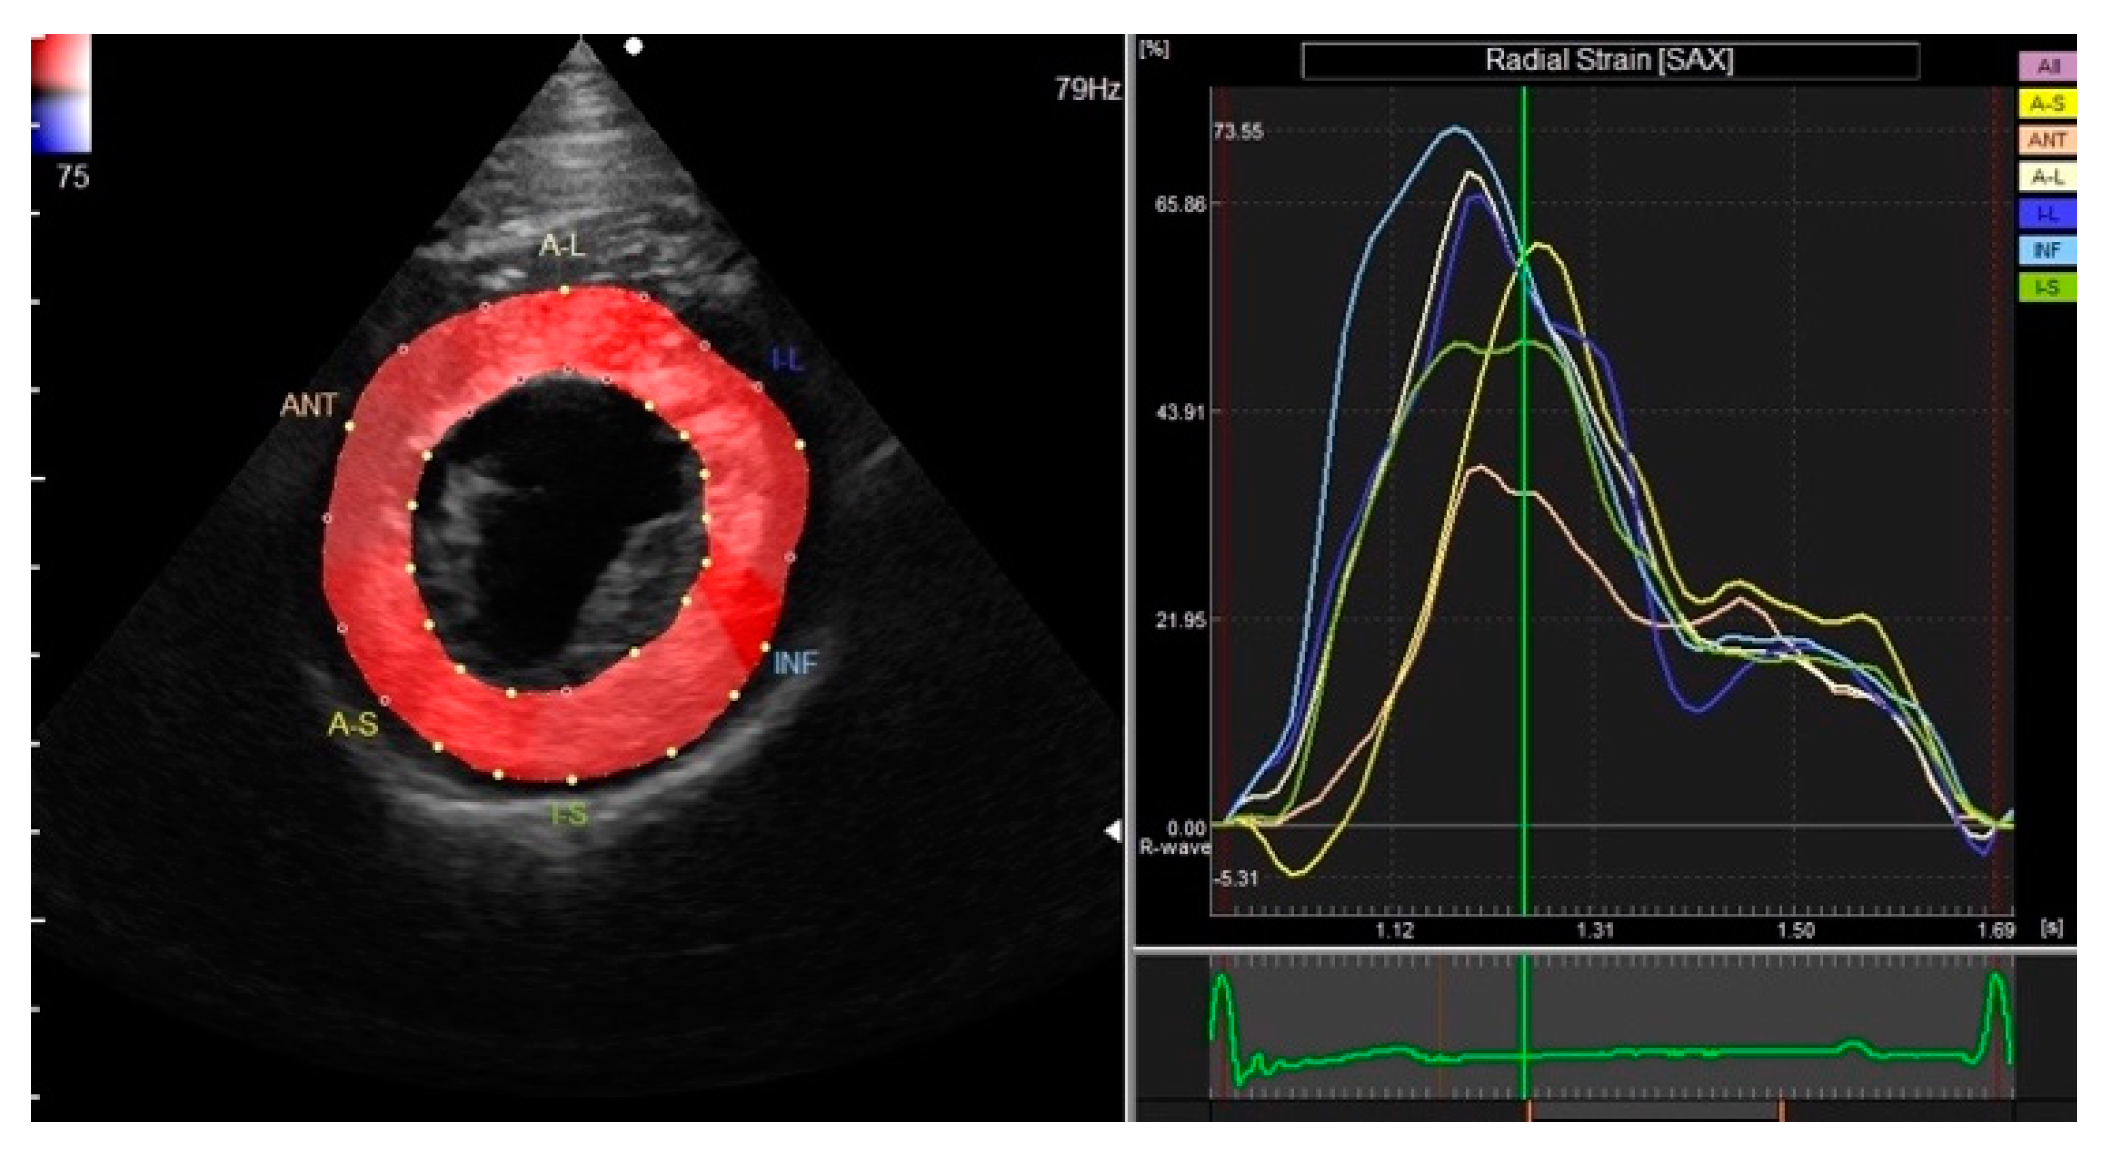 Frontiers  Myocardial strain analysis of echocardiography based